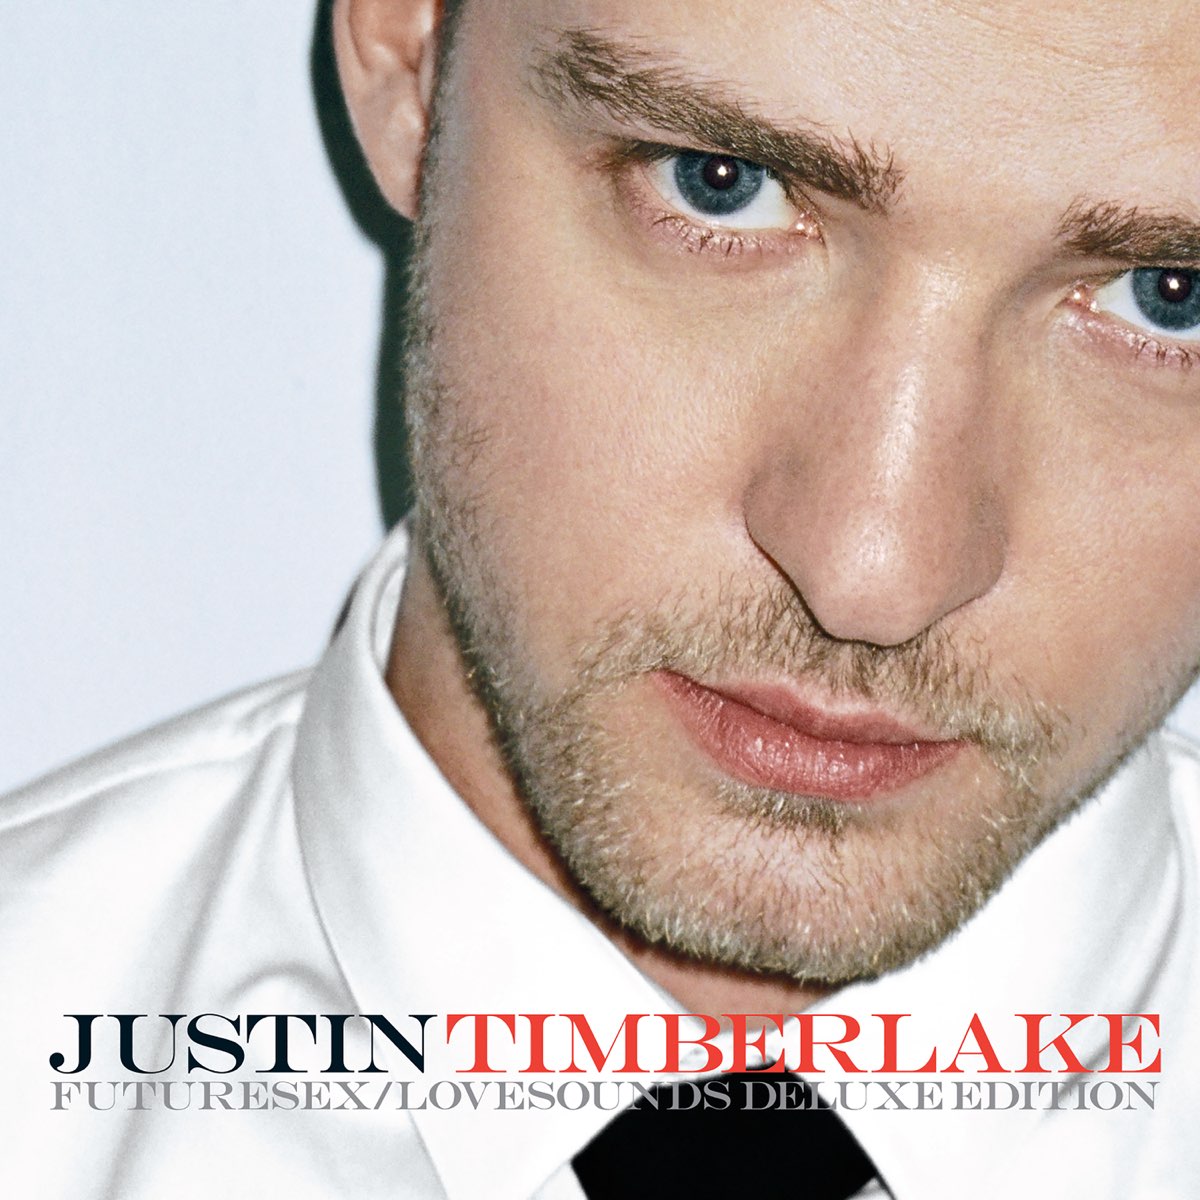 ‎futuresexlovesounds Deluxe Version Album By Justin Timberlake 